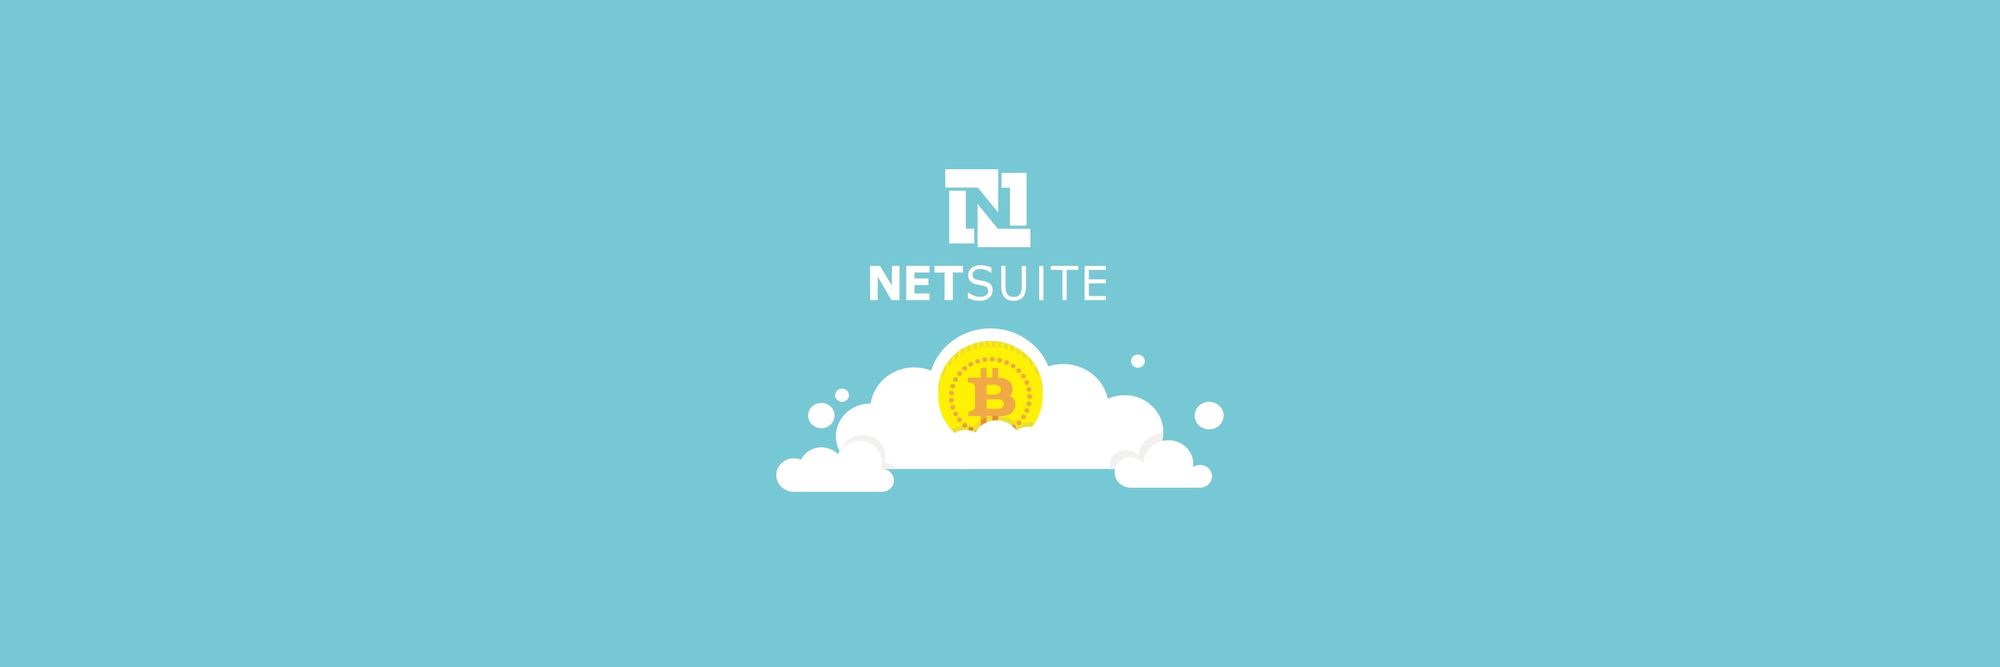 A Bitcoin Solution for NetSuite